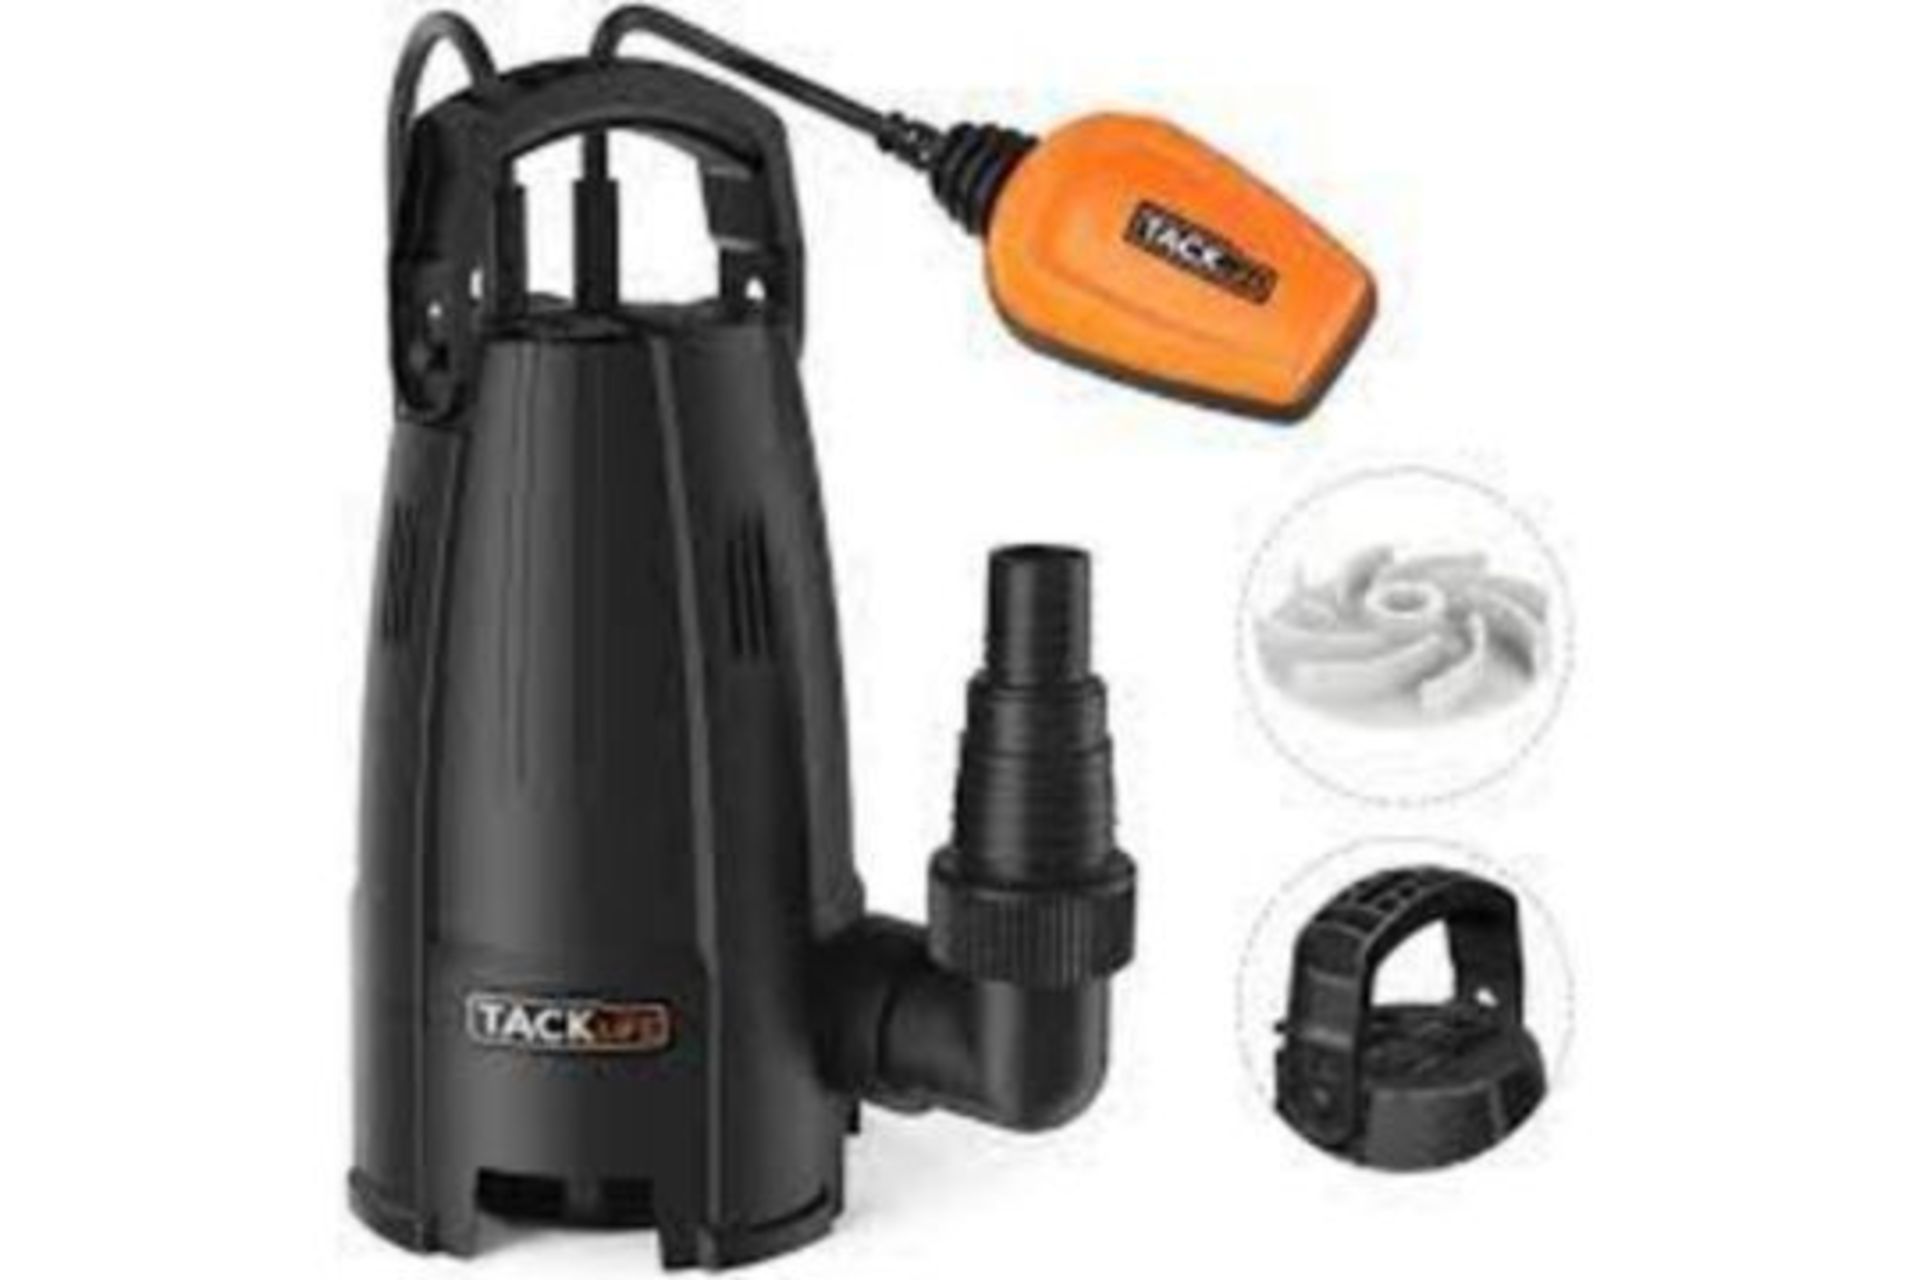 NEW BOXED Tacklife GSUP2B 400W Corded Submersible Utility Water Pump. (ROW 17)